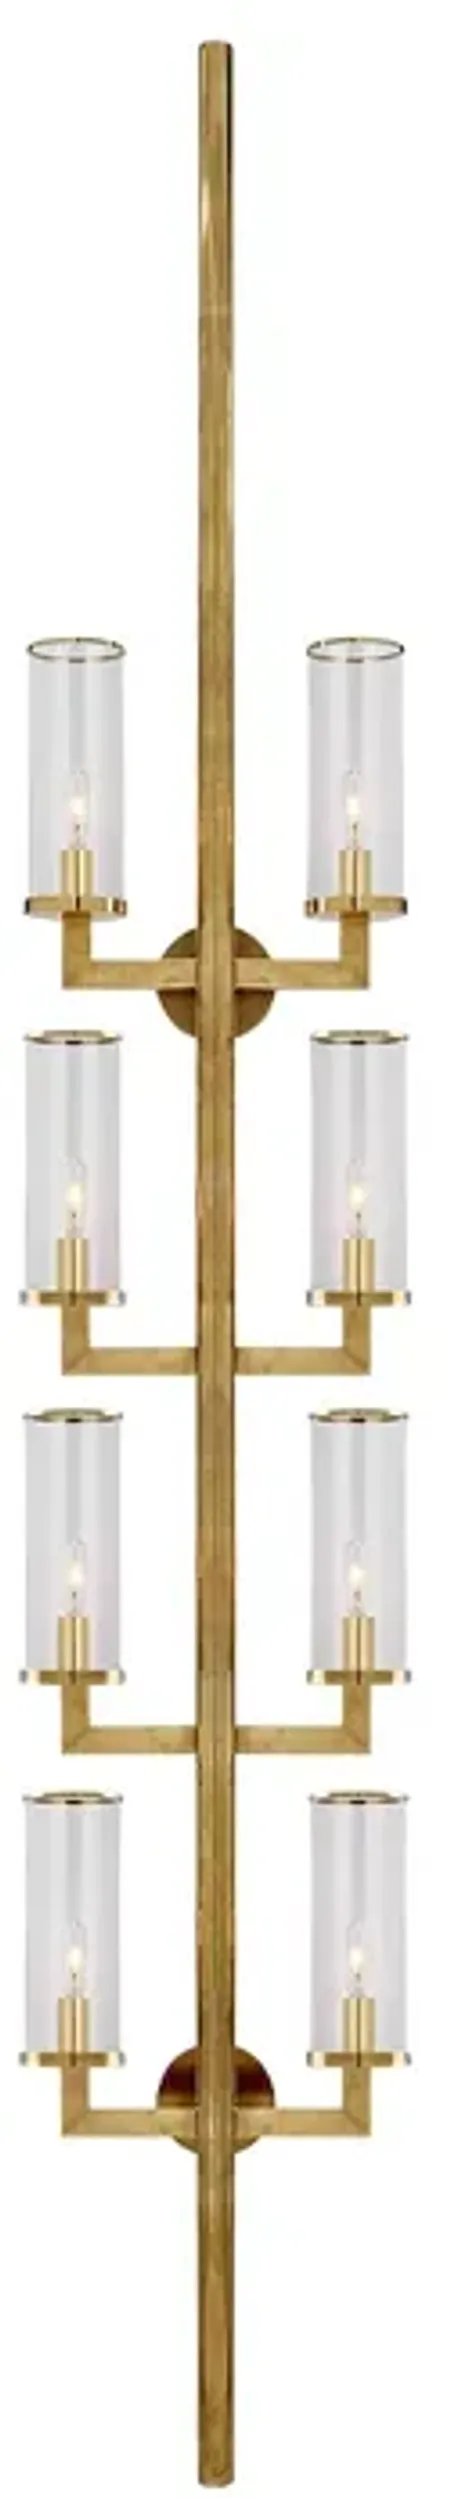 Kelly Wearstler Liaison 8 Light Statement Sconce with Clear Glass